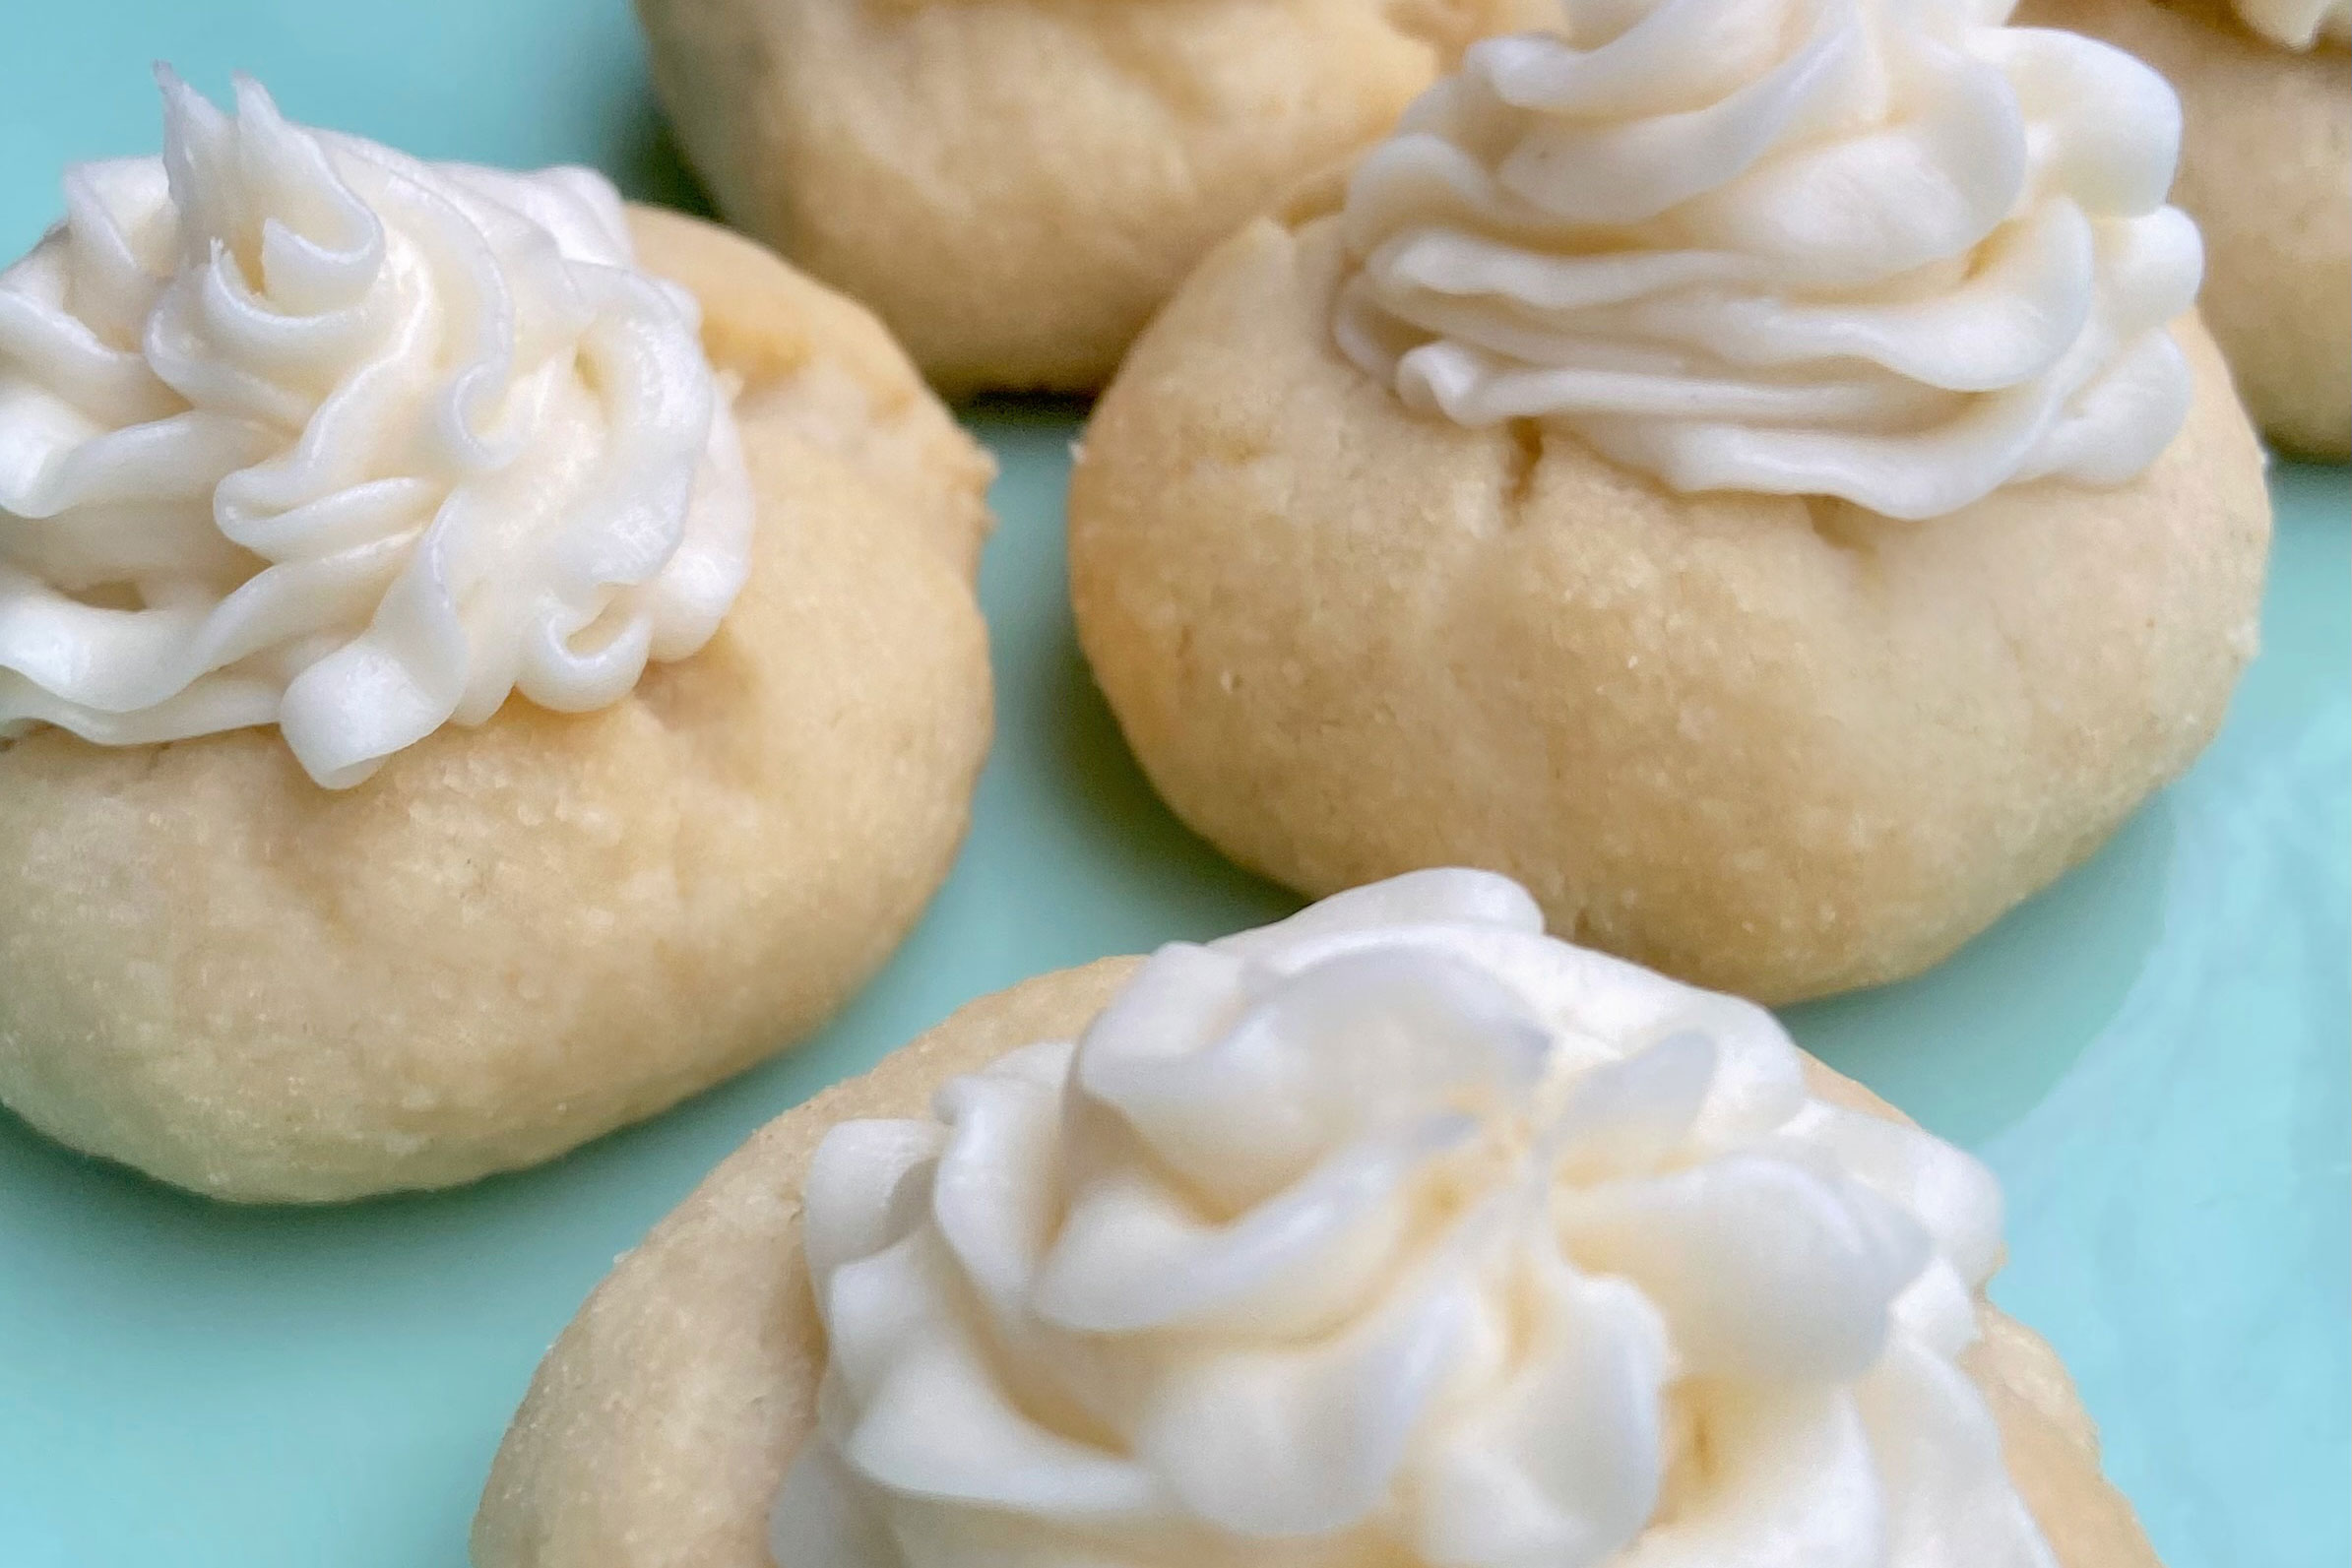 Pale cookies topped with a swirl of pale white frosting on a turquoise plate.